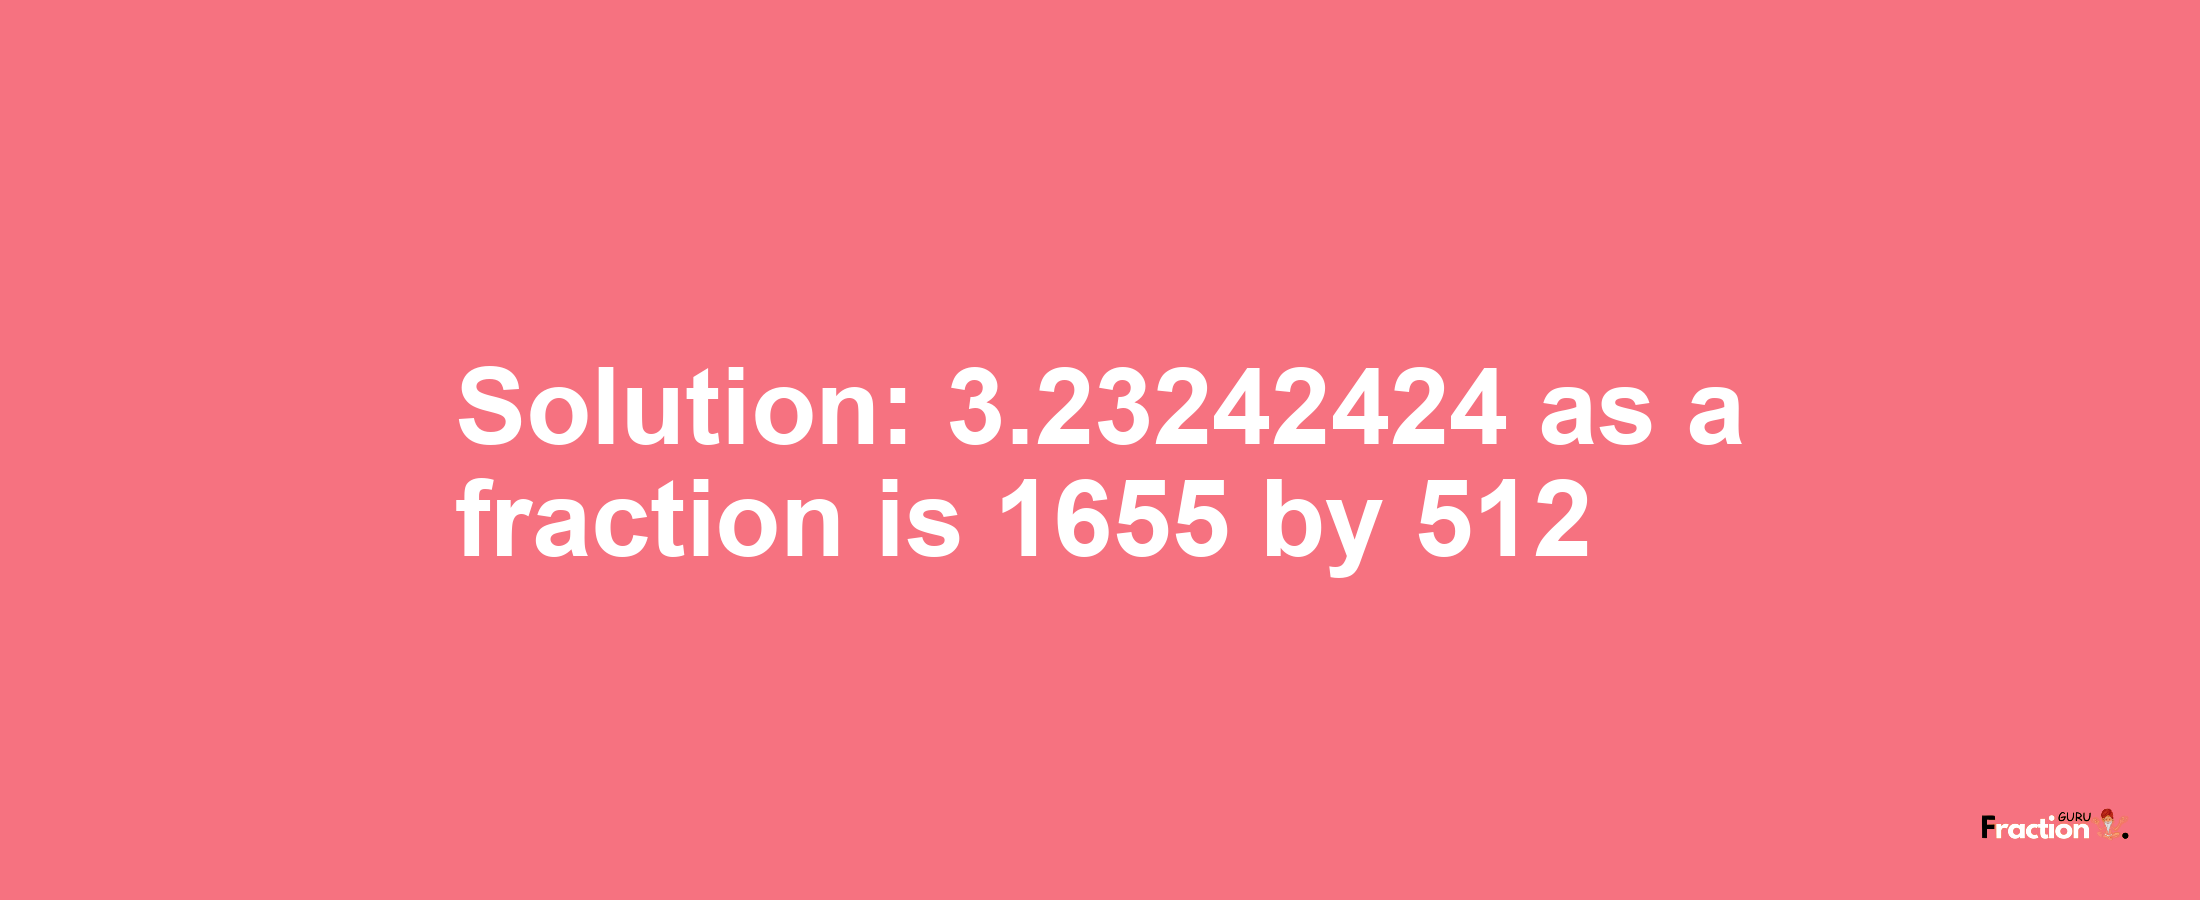 Solution:3.23242424 as a fraction is 1655/512